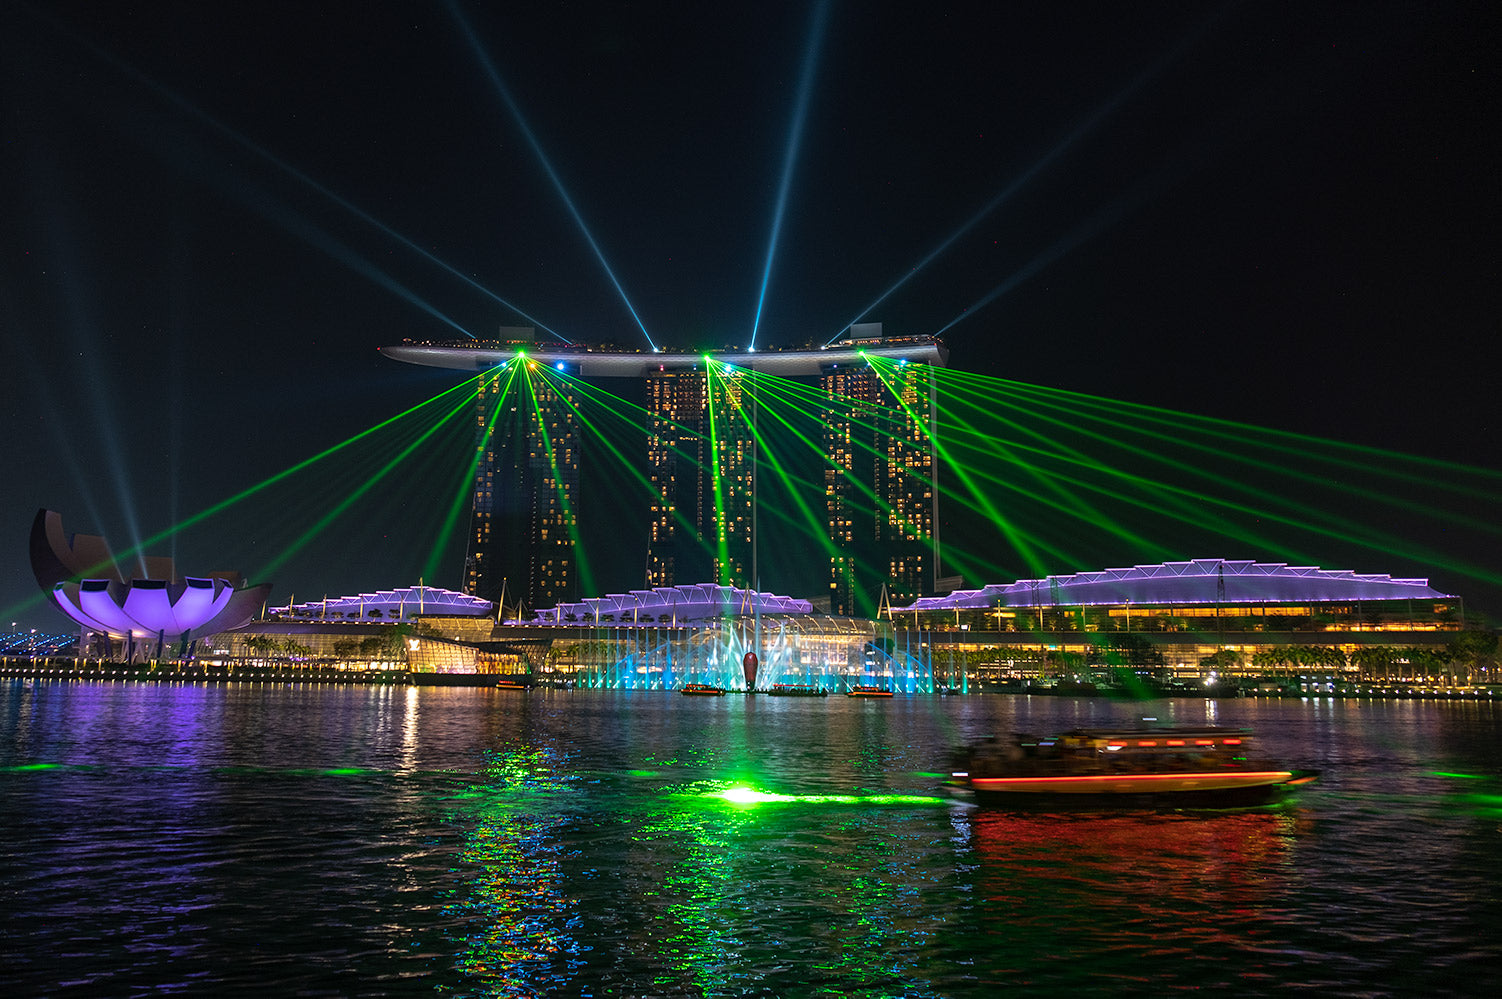 A spectacular light show plays out across the bay at night from the top of the Marina Bay Sands Hotel, Singapore. 